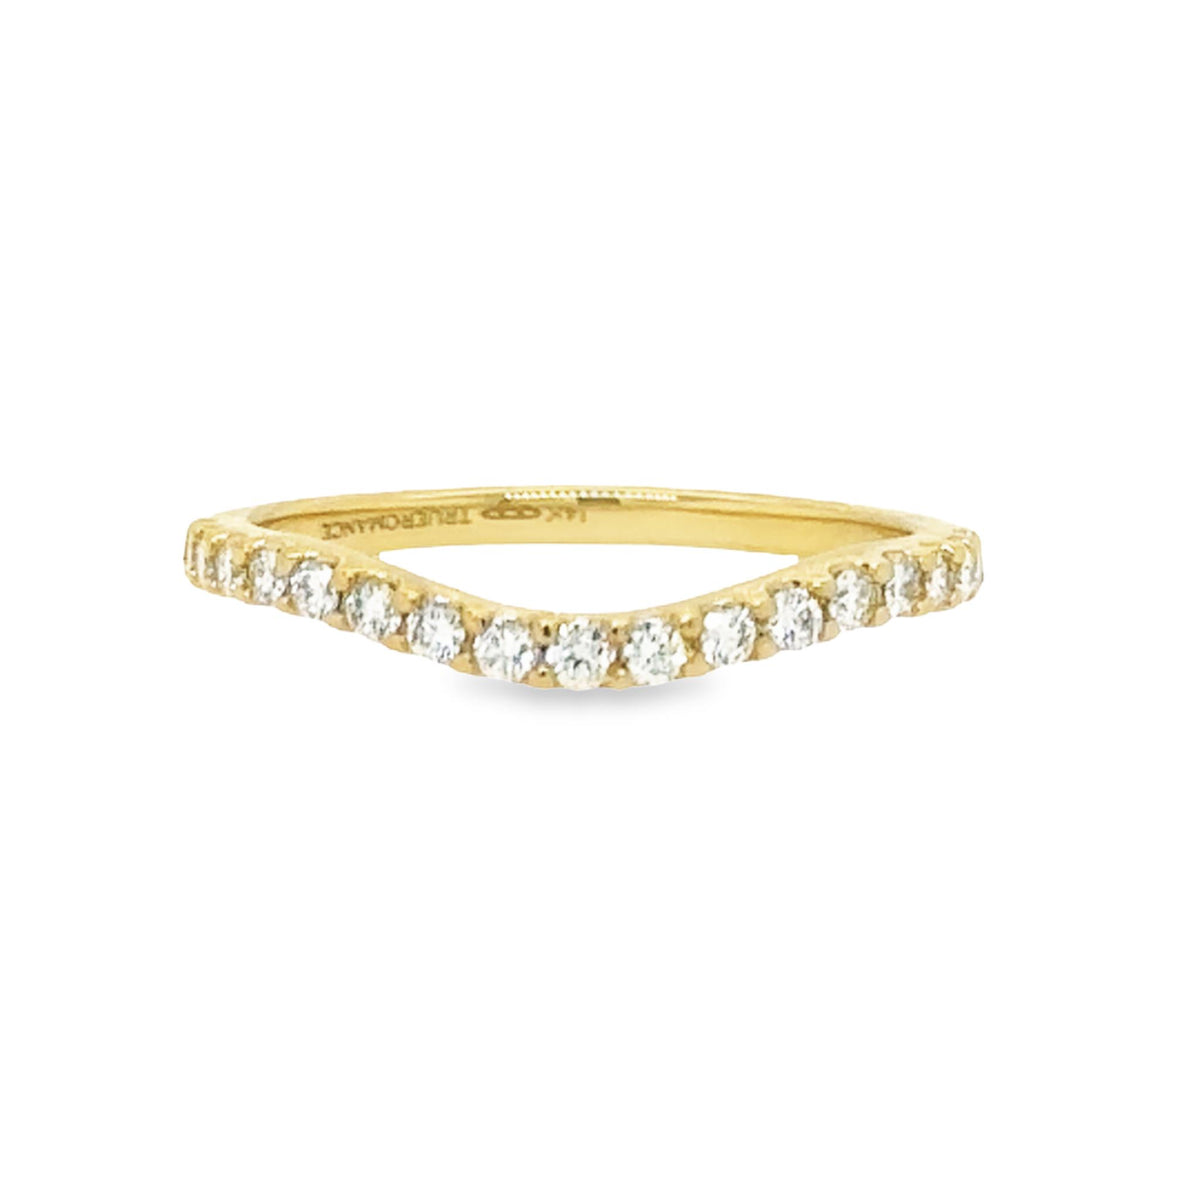 14Kt Yellow Gold Curved Wedding Ring With 0.34cttw Natural Diamonds